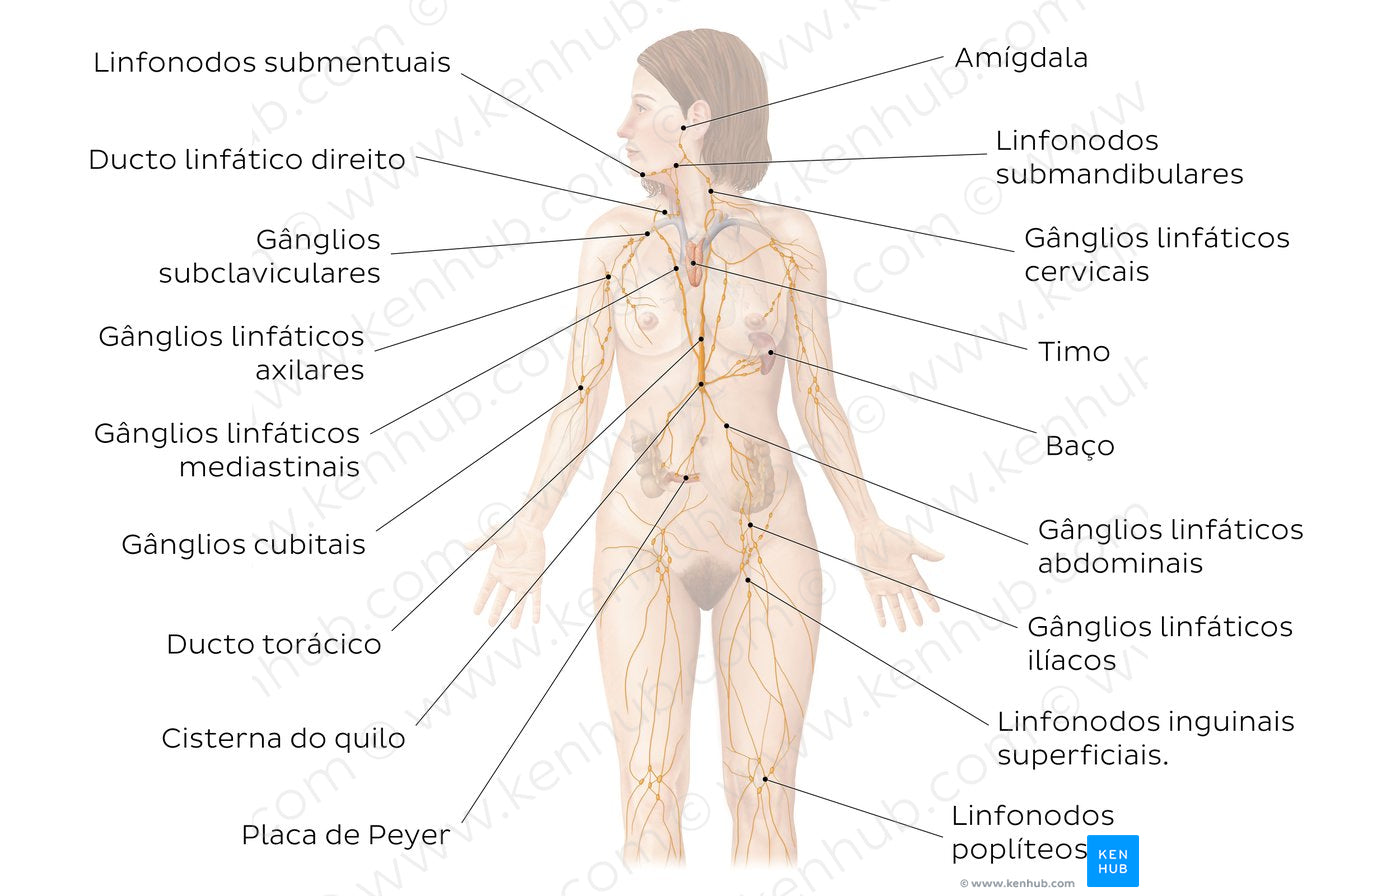 Lymphatic system (Portuguese)